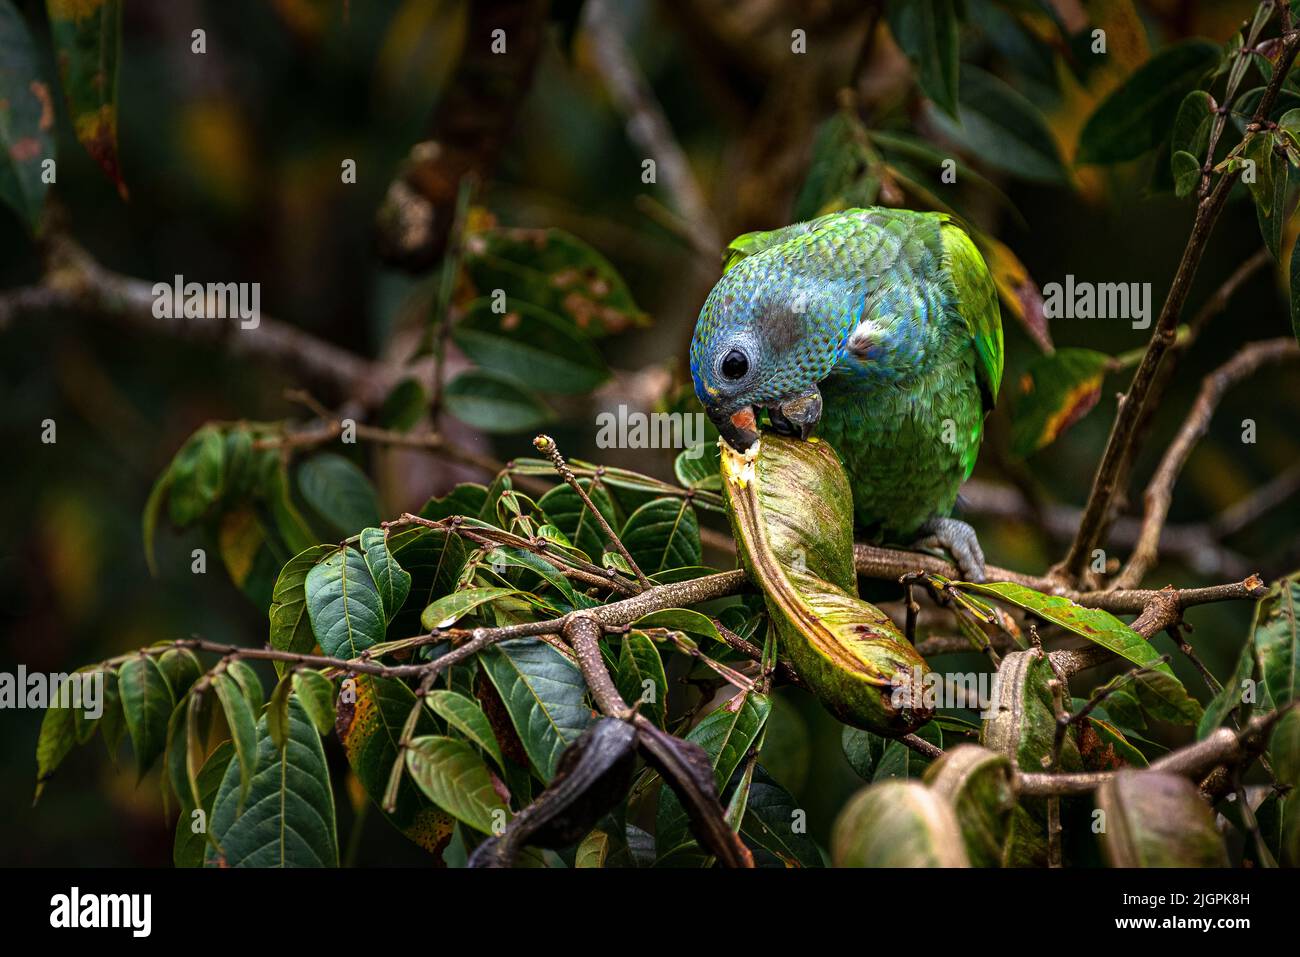 Blue headed parrot feeding in a tree in the rain forest of Panama Stock Photo